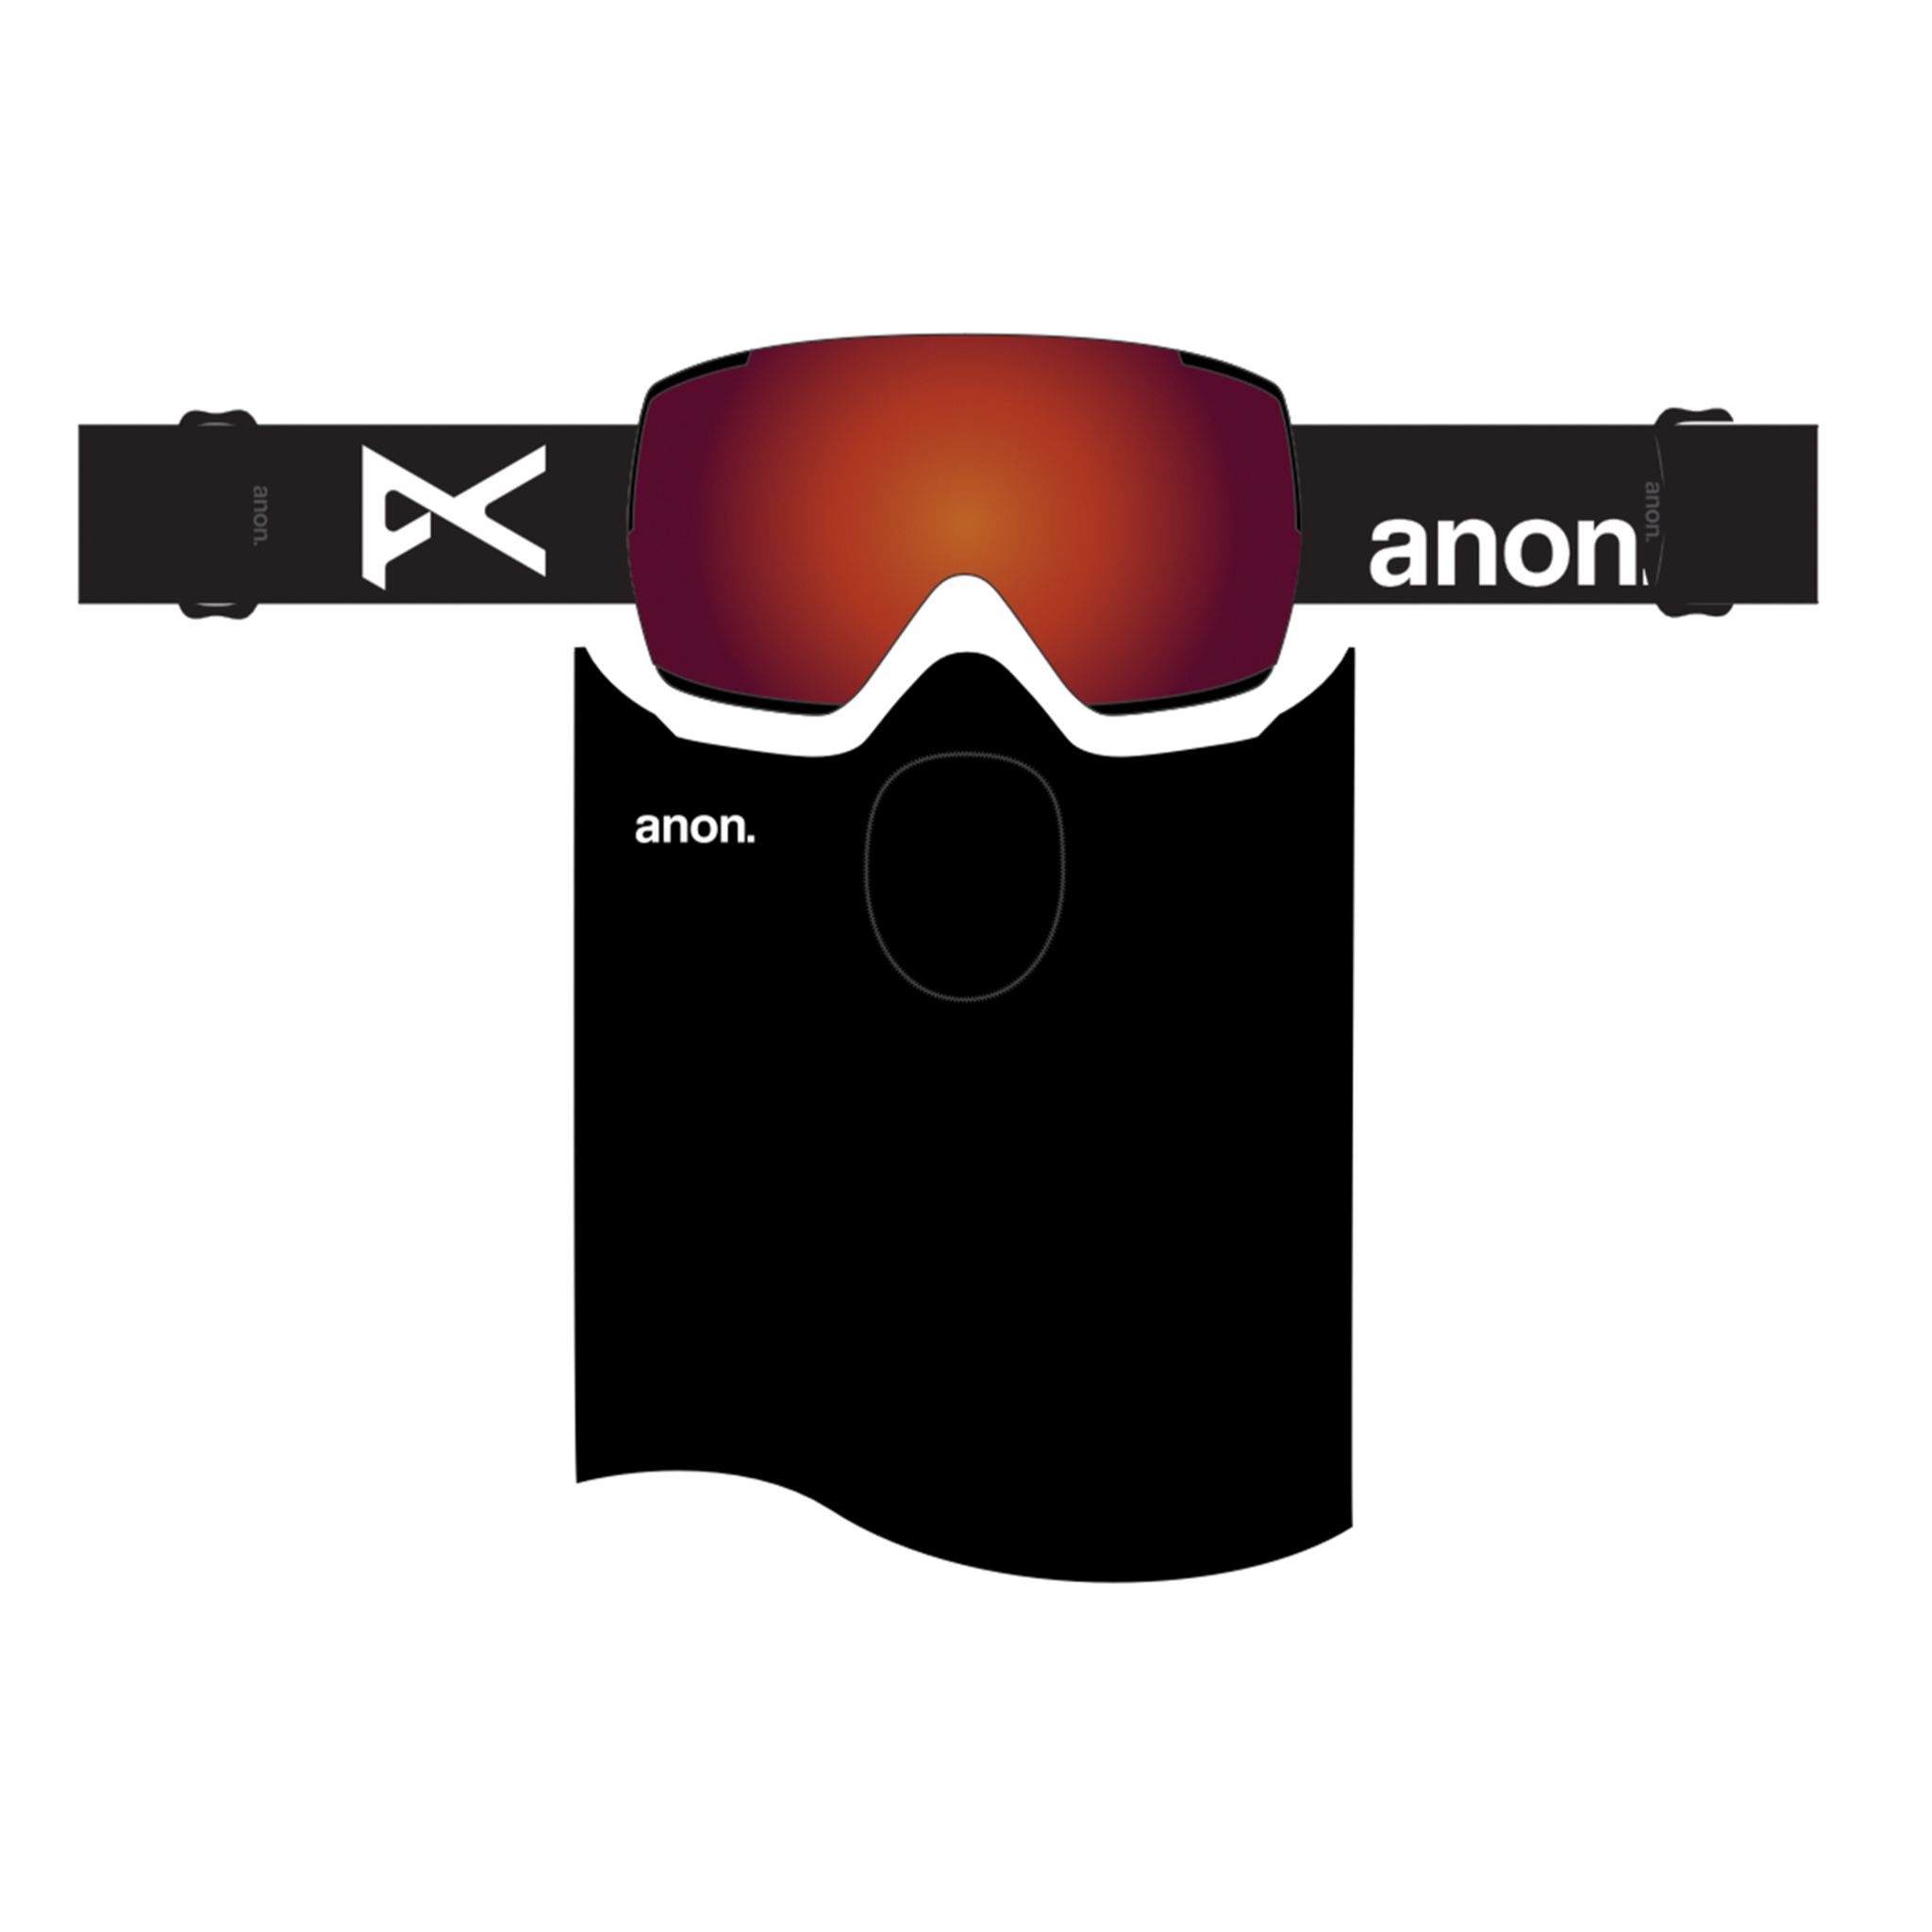 ANON M5S GOGGLES - BLACK/PERCEIVE SUNNY RED (LOW BRIDGE) +MFI MASK + SPARE LENS